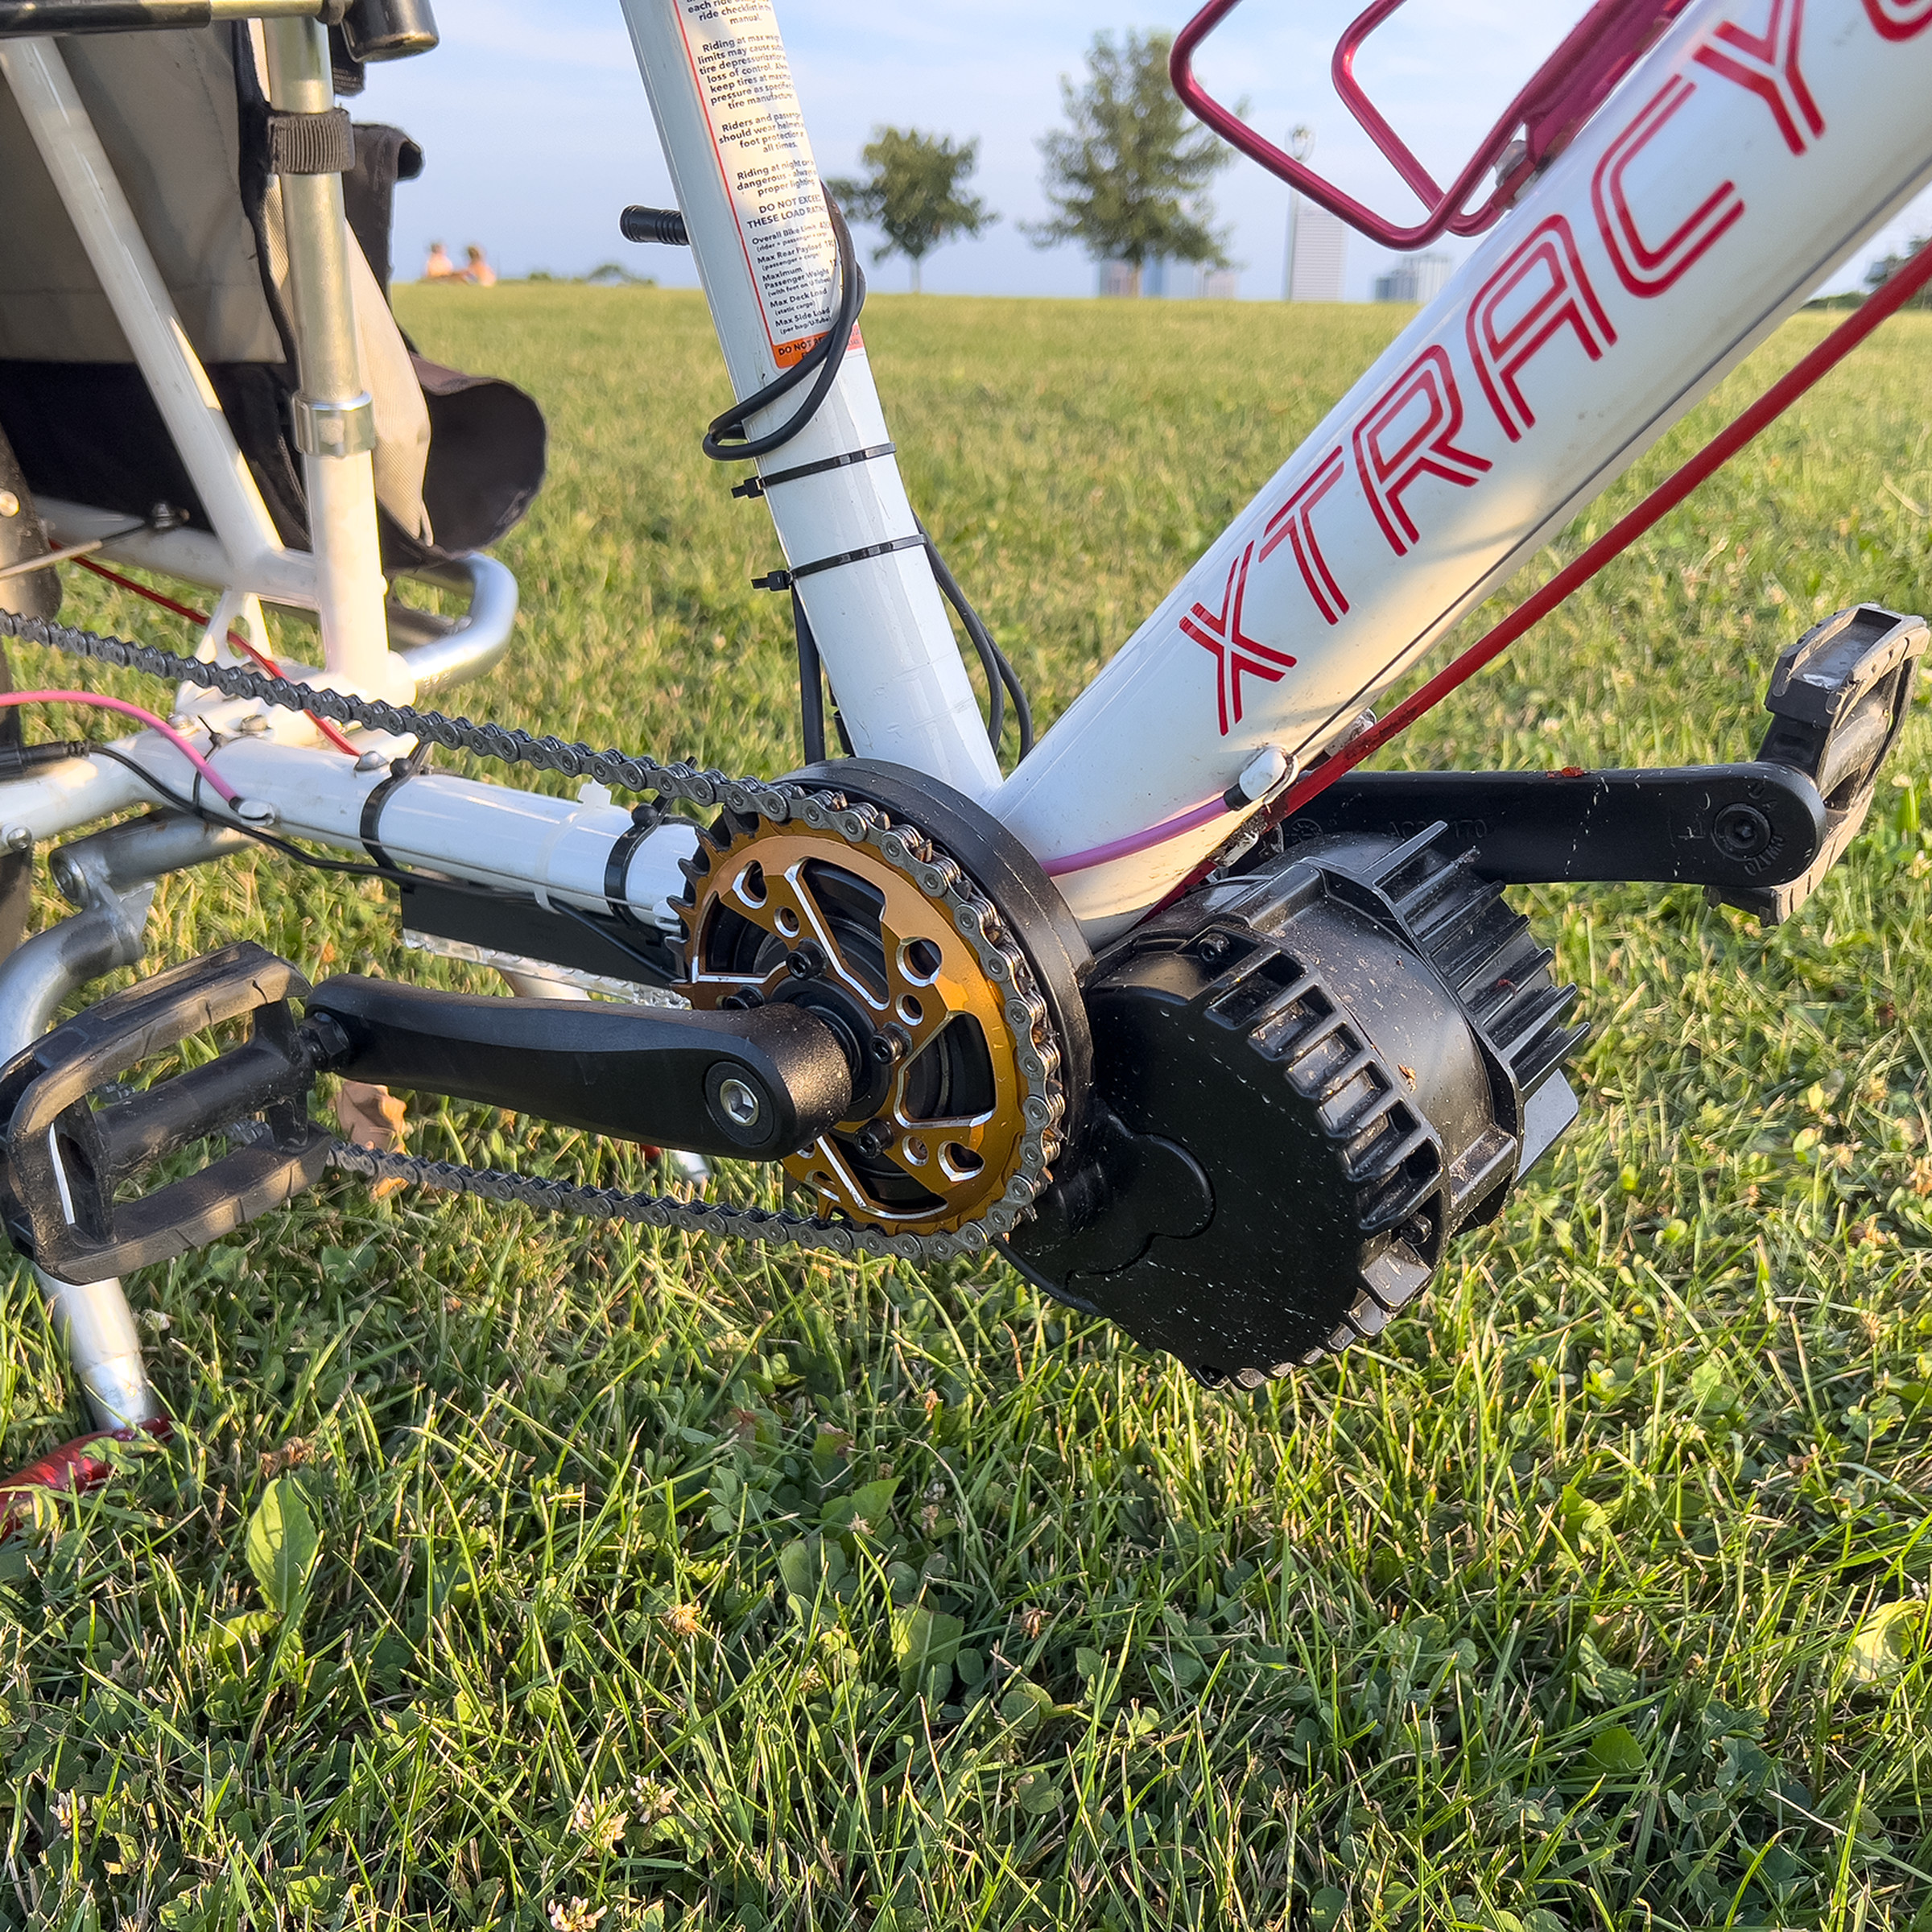 A close-up of the bike’s bottom bracket section after it was finished. It has the e-bike motor, new chainring, and new chain installed. It is sitting in a grassy field at sunset.